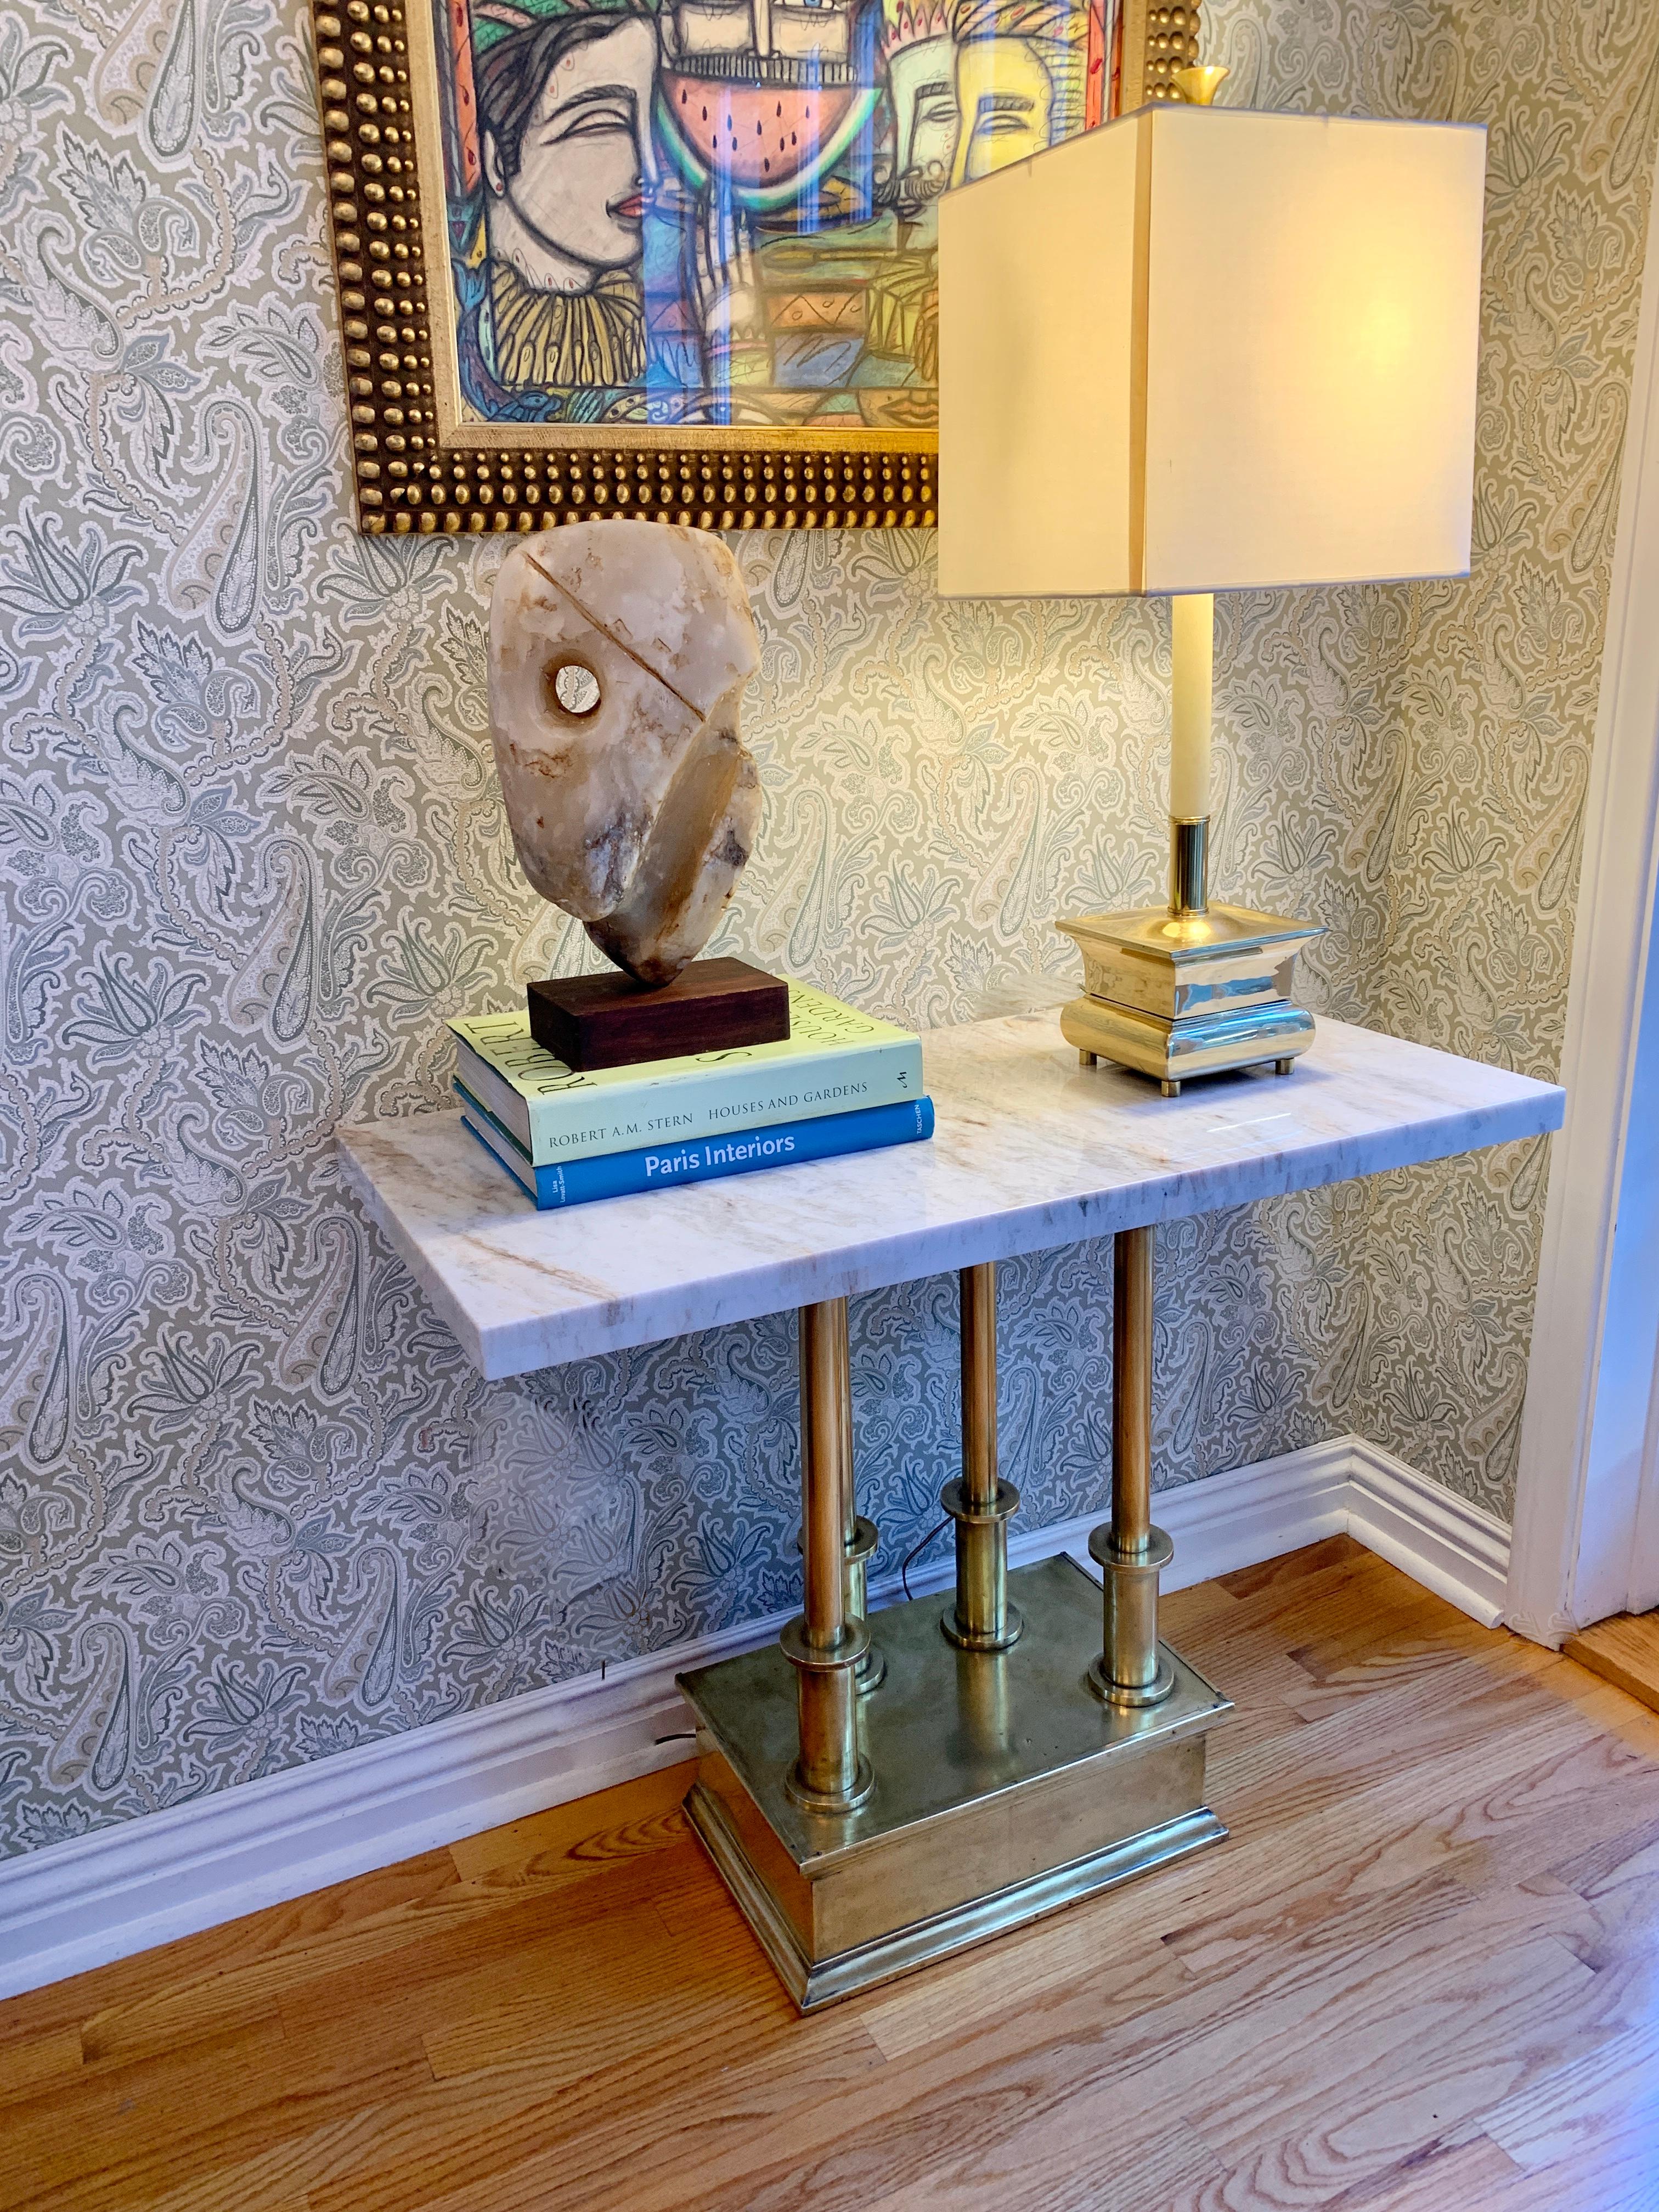 A brass console base of four architectural columns with periodic spheres - the top is honed white marble. 

The vintage piece has been partially polished giving the piece a bit of brilliant sheen. The brass wraps around the front - the rear is not